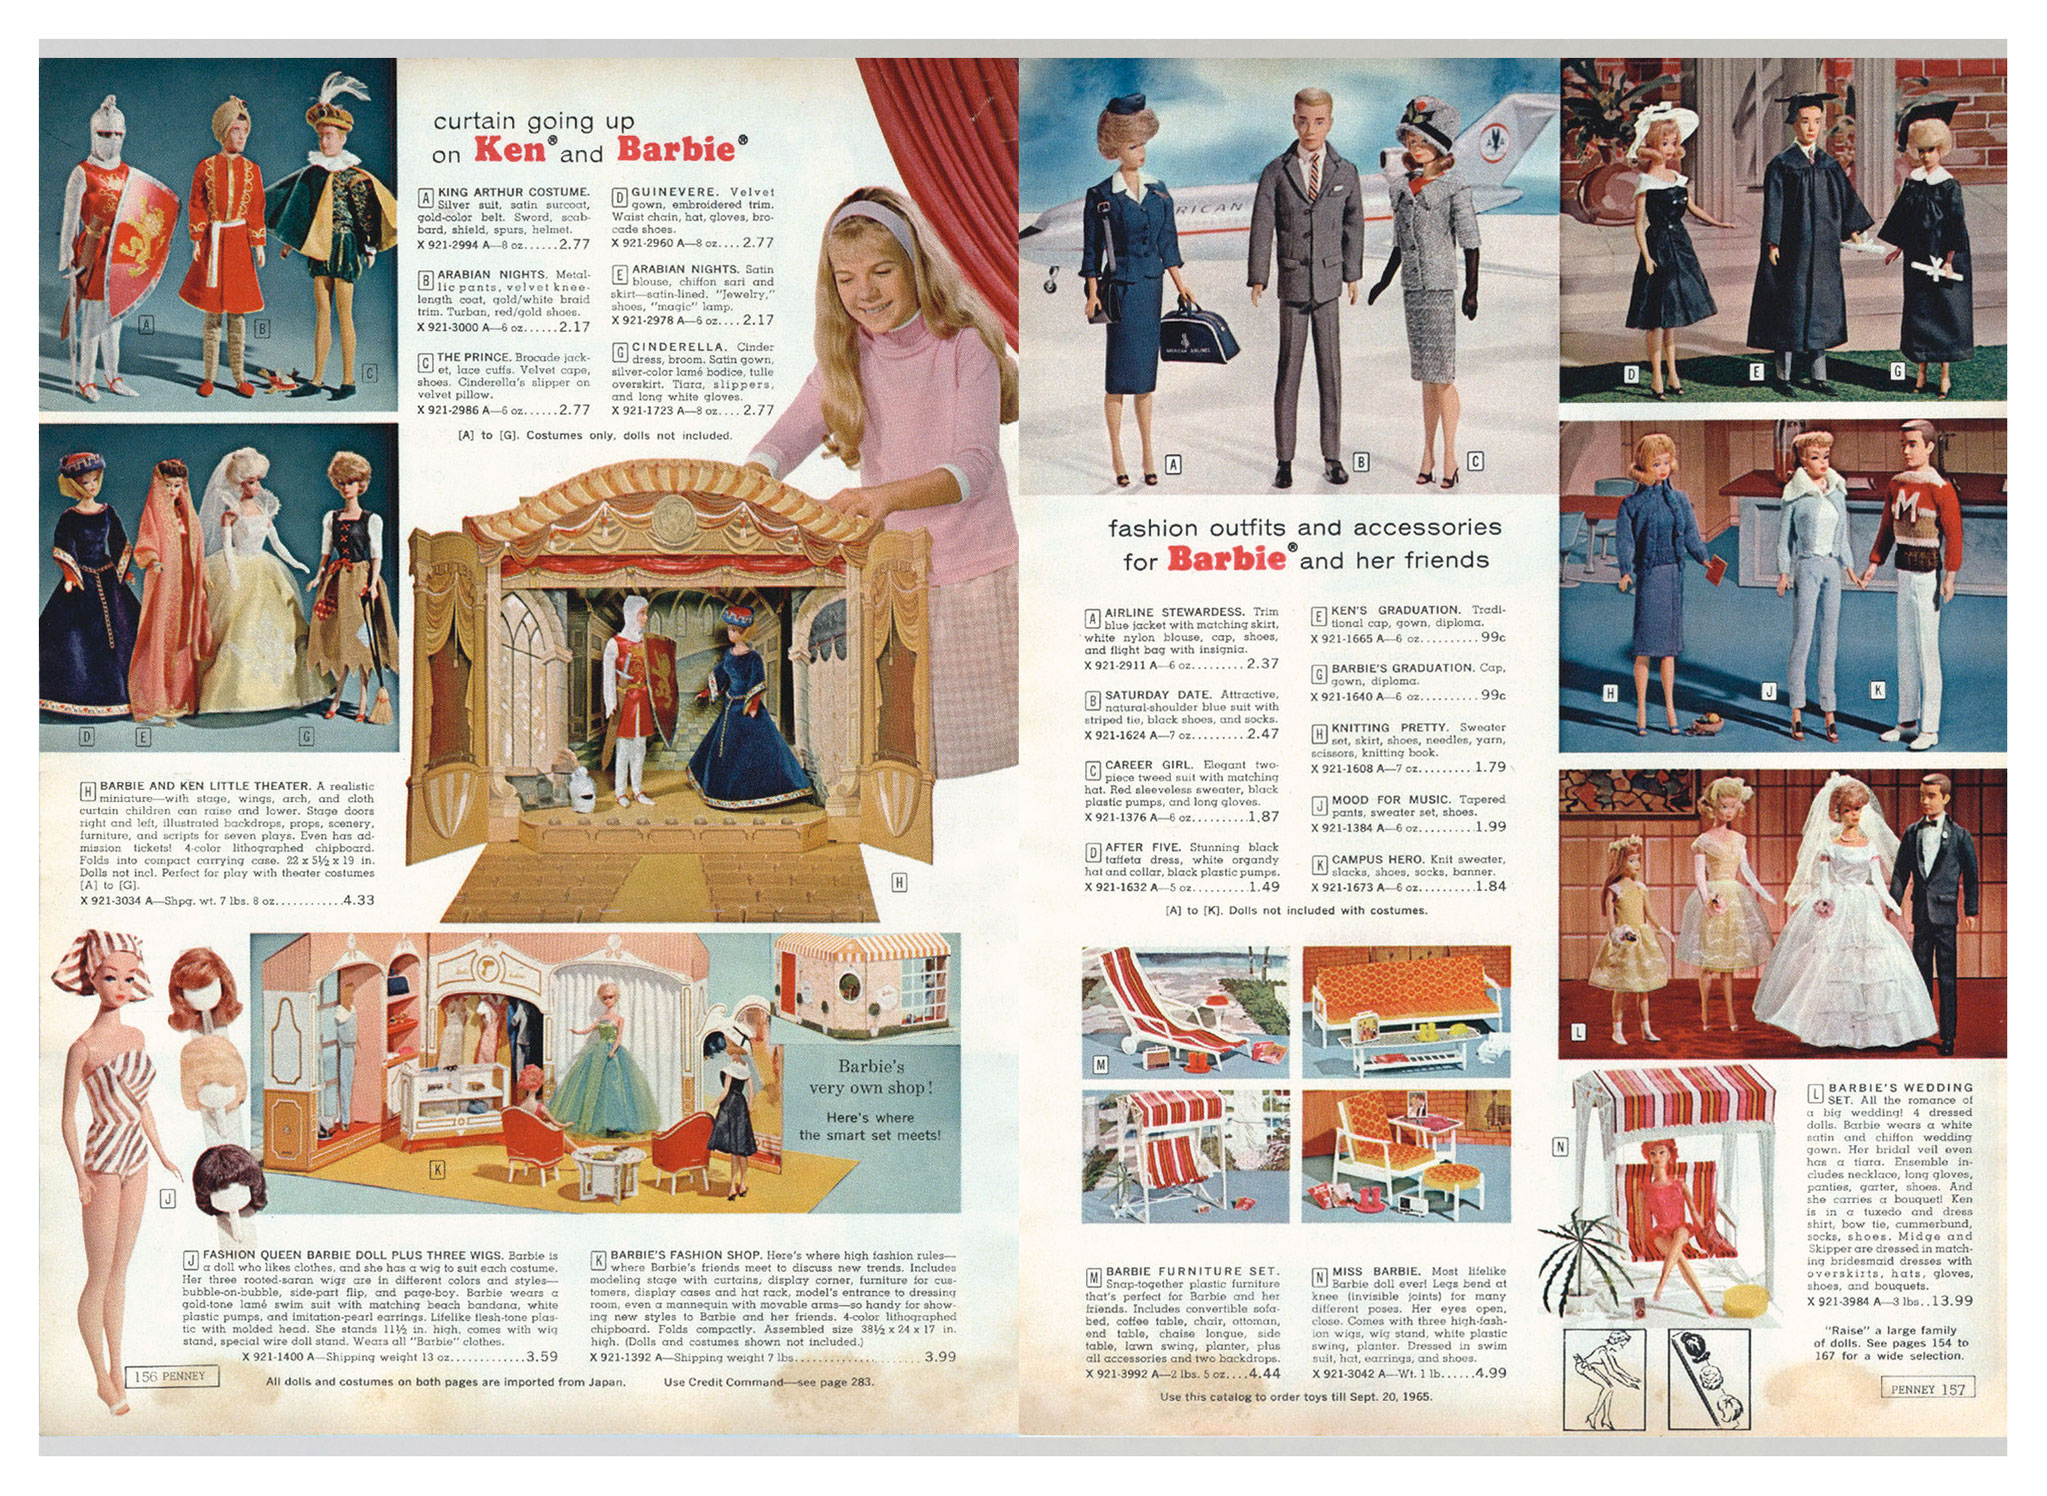 From 1964 Penneys Christmas catalogue